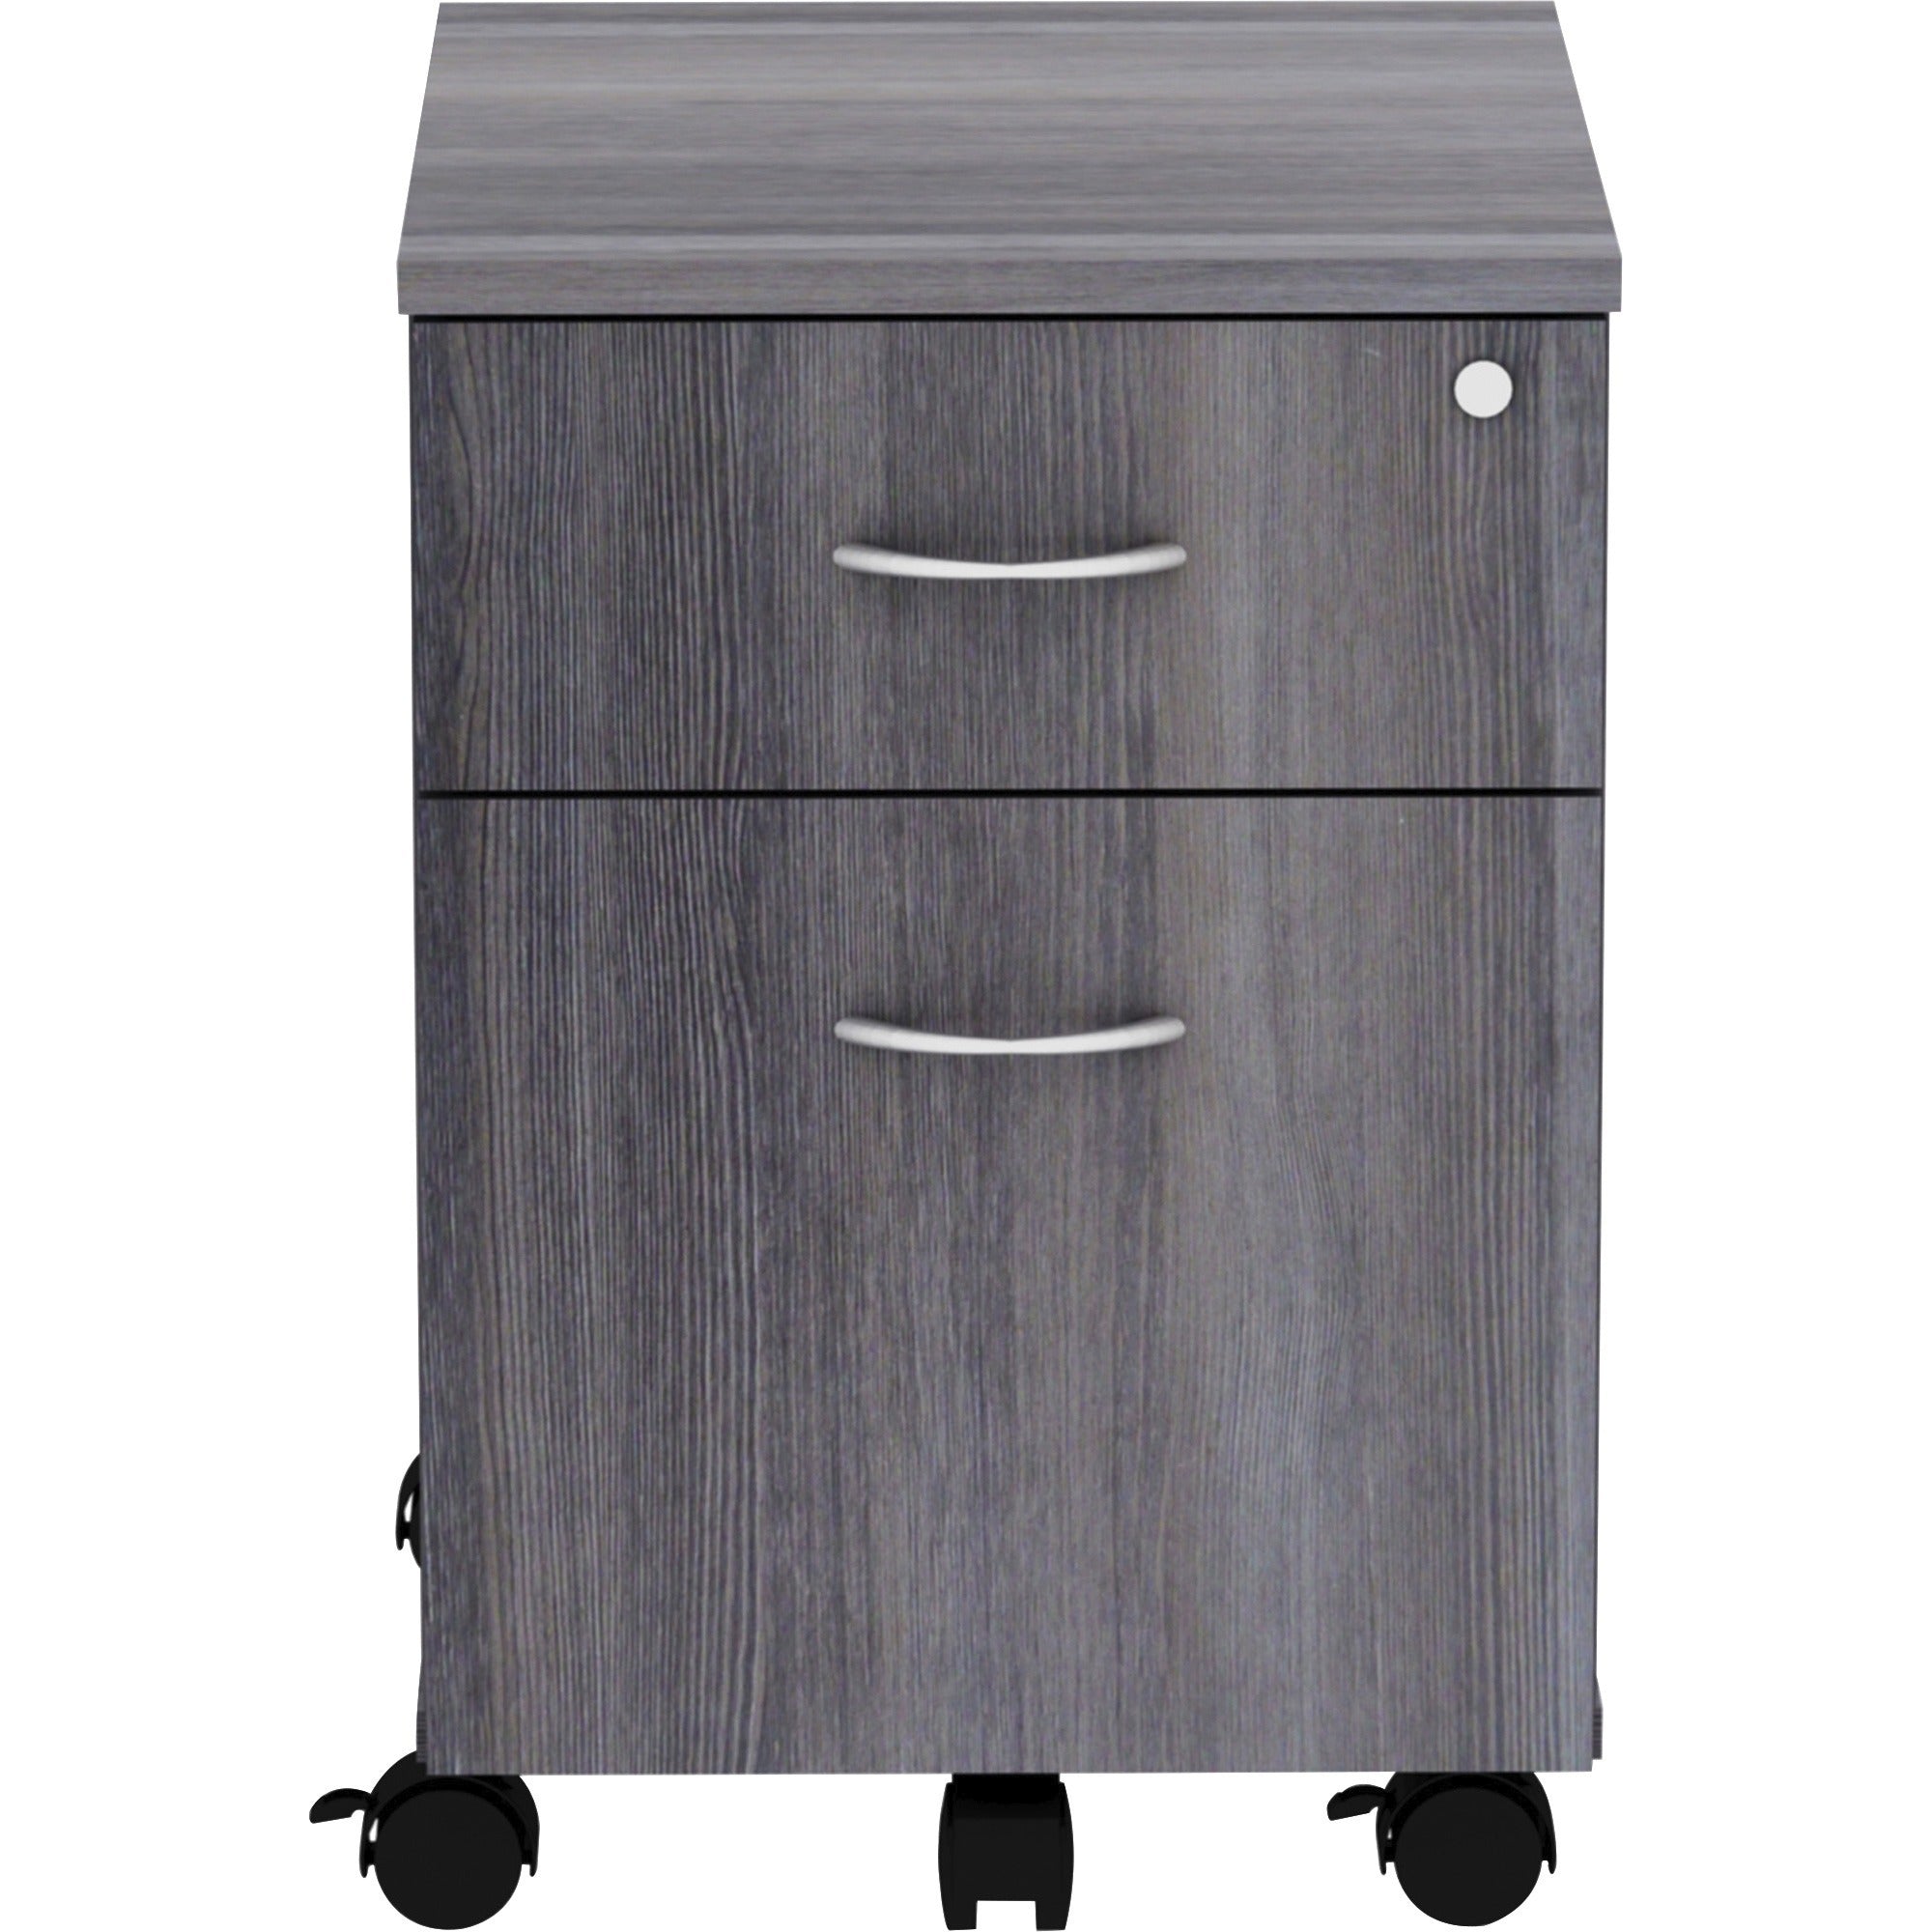 lorell-relevance-series-2-drawer-file-cabinet-158-x-199229-2-x-file-box-drawers-finish-weathered-charcoal-laminate_llr16217 - 2